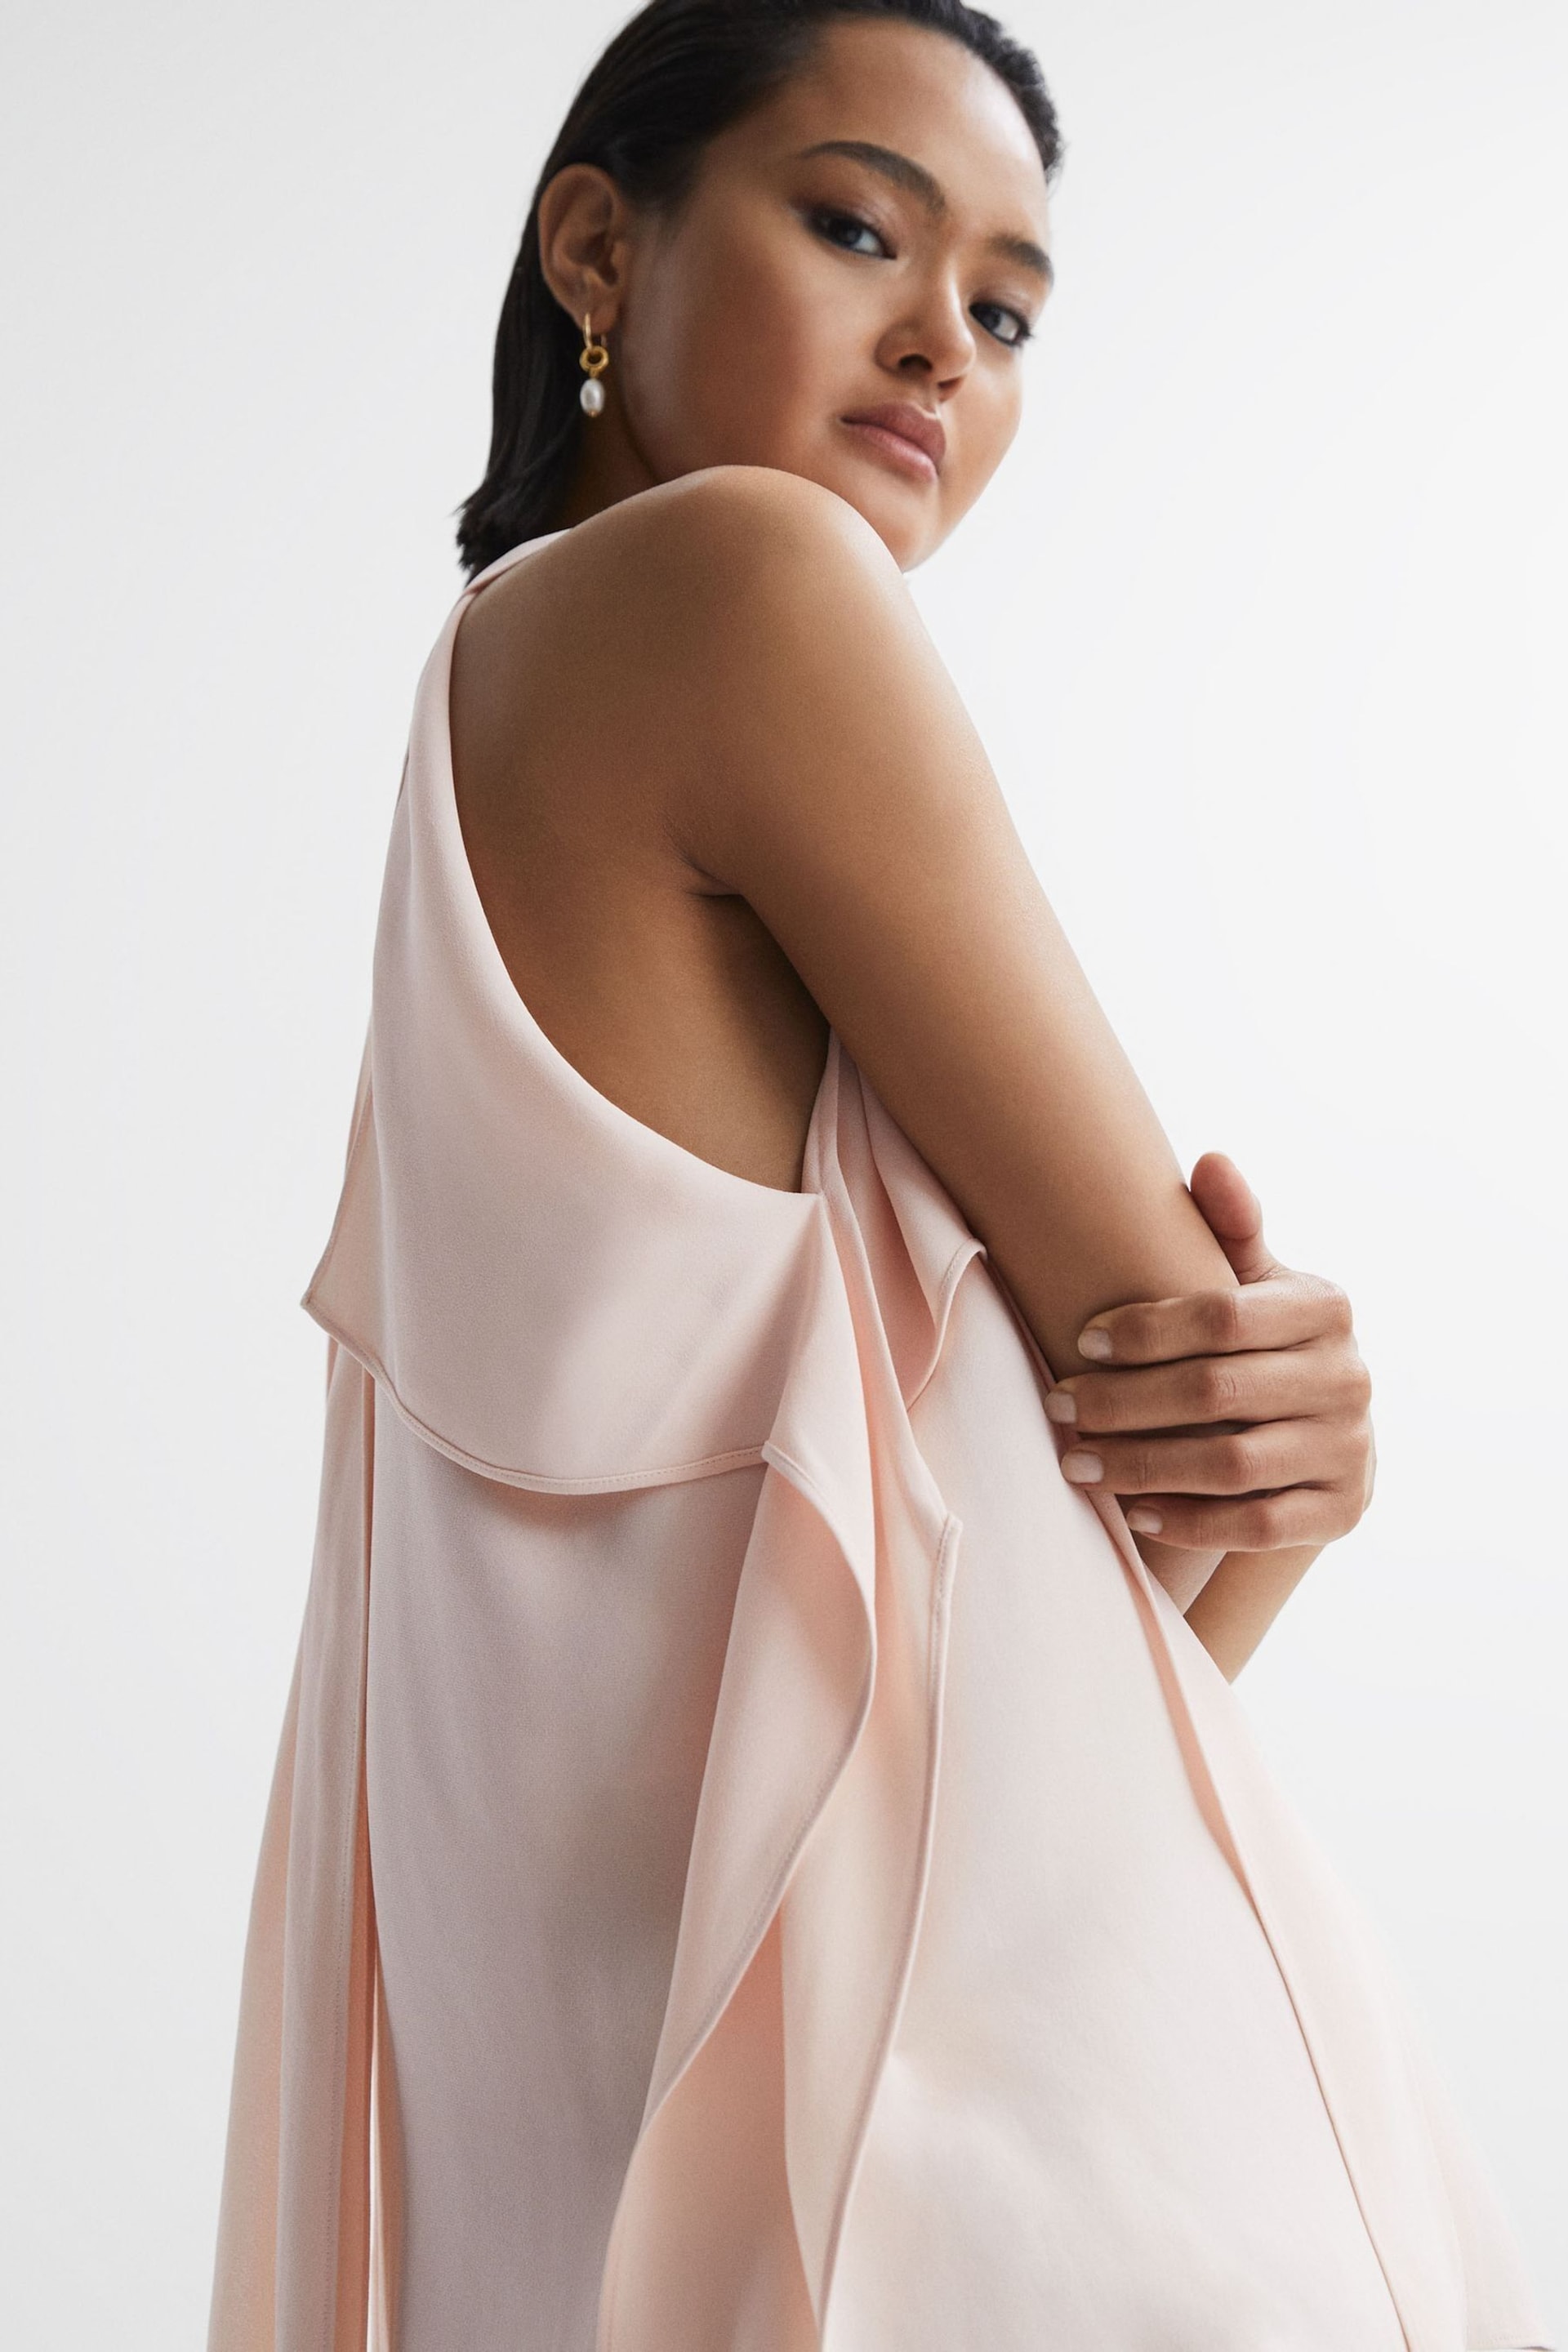 Reiss Nude Calista Tie Neck Draped Blouse - Image 3 of 5